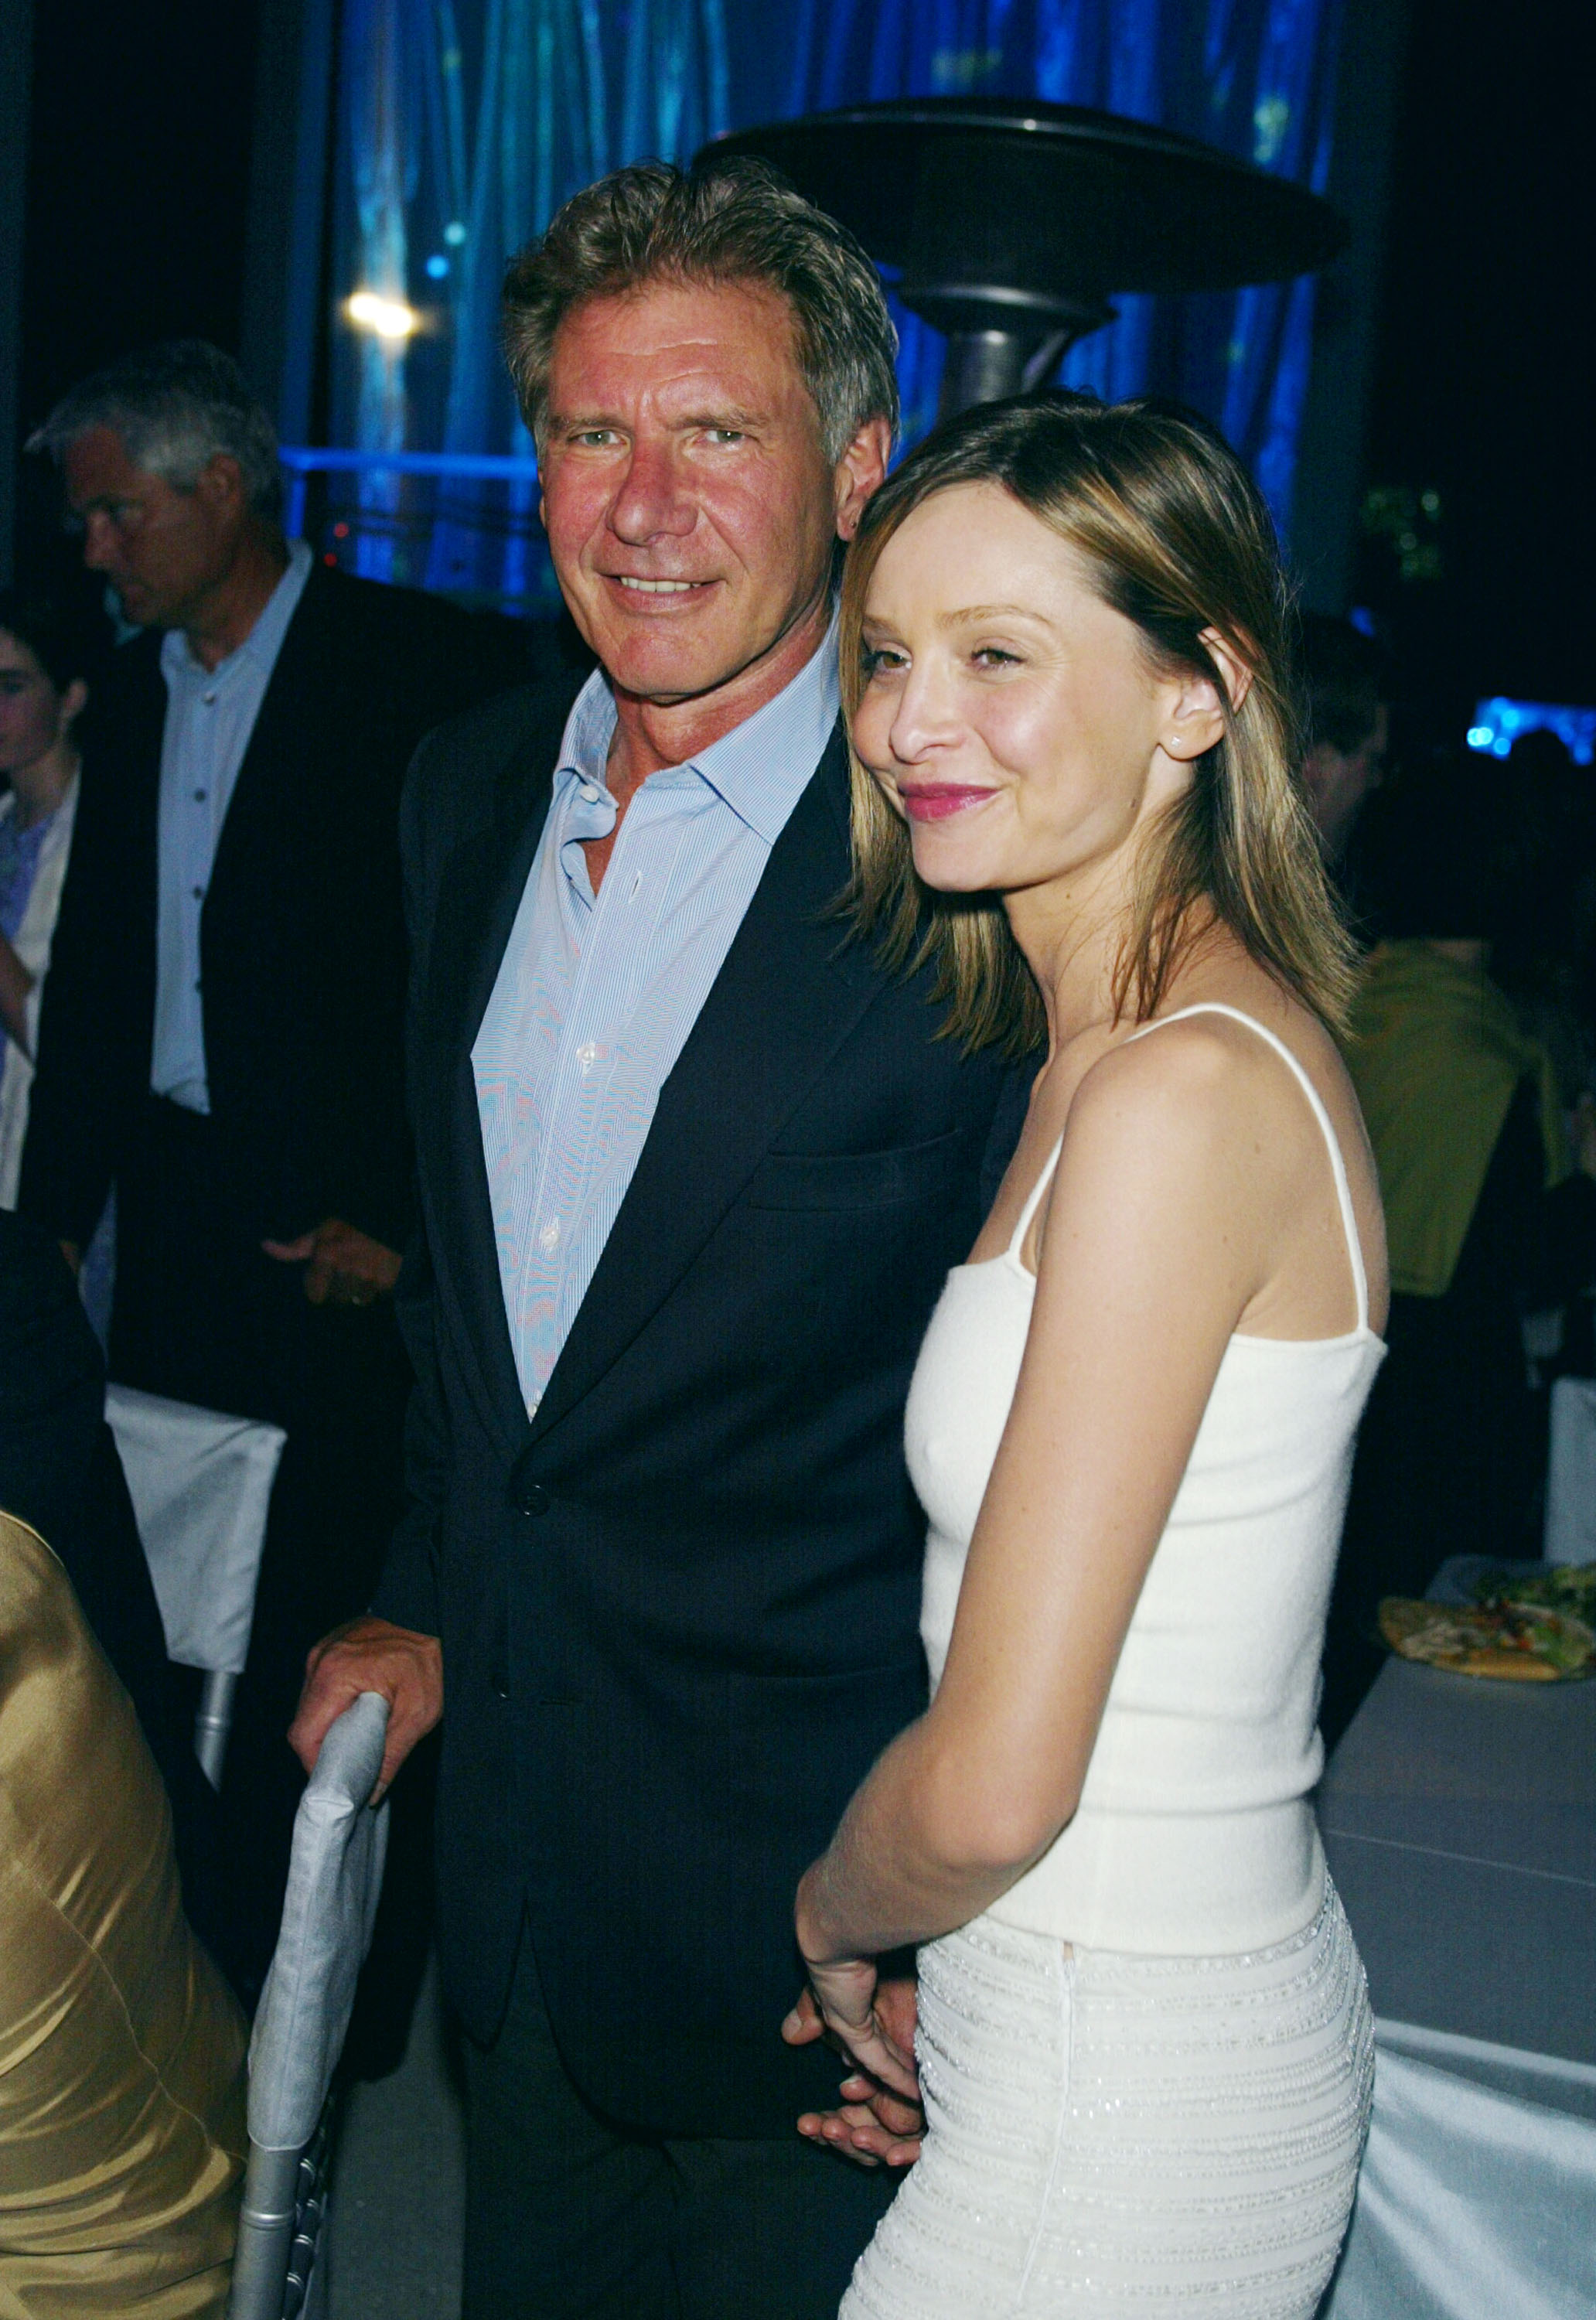 Harrison Ford and Calista Flockhart at the premiere party for "K-19: The Widowmaker" at the Village Theatre in Westwood, California on July 15, 2002 | Source: Getty Images